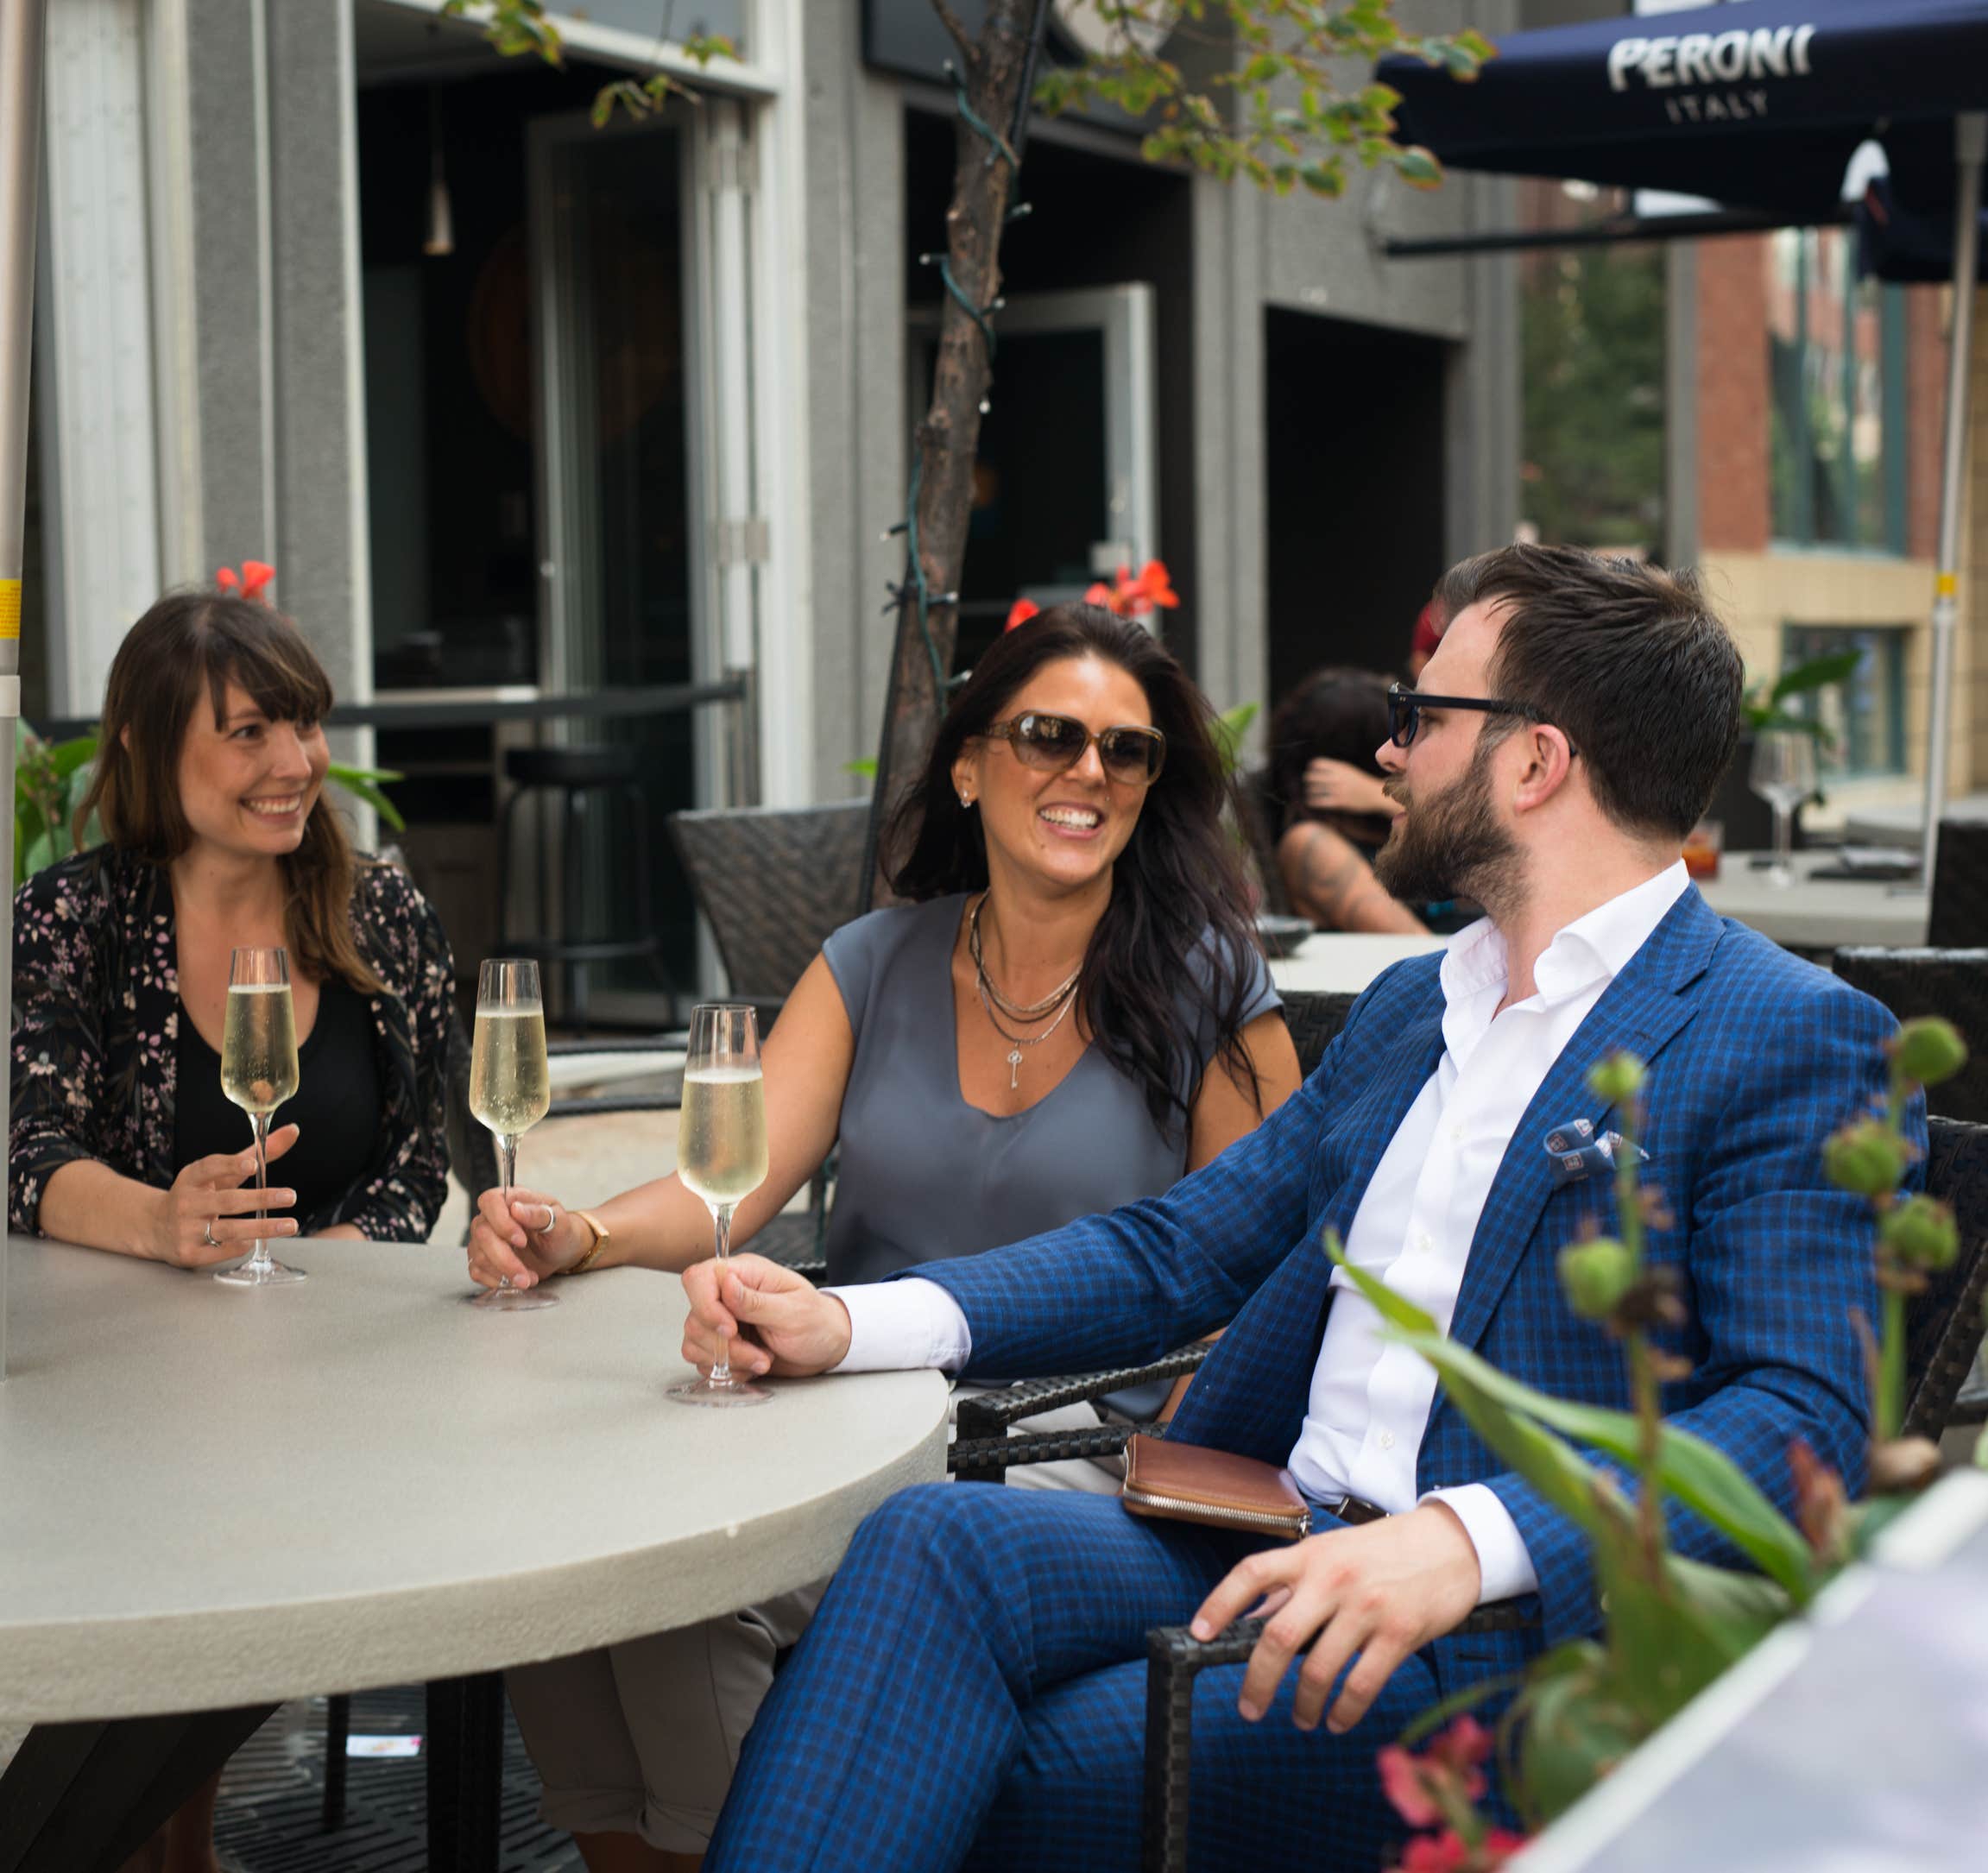 THE 8 BEST EDMONTON PATIOS TO SOAK UP THE SUMMER (AND WHAT TO WEAR THERE)